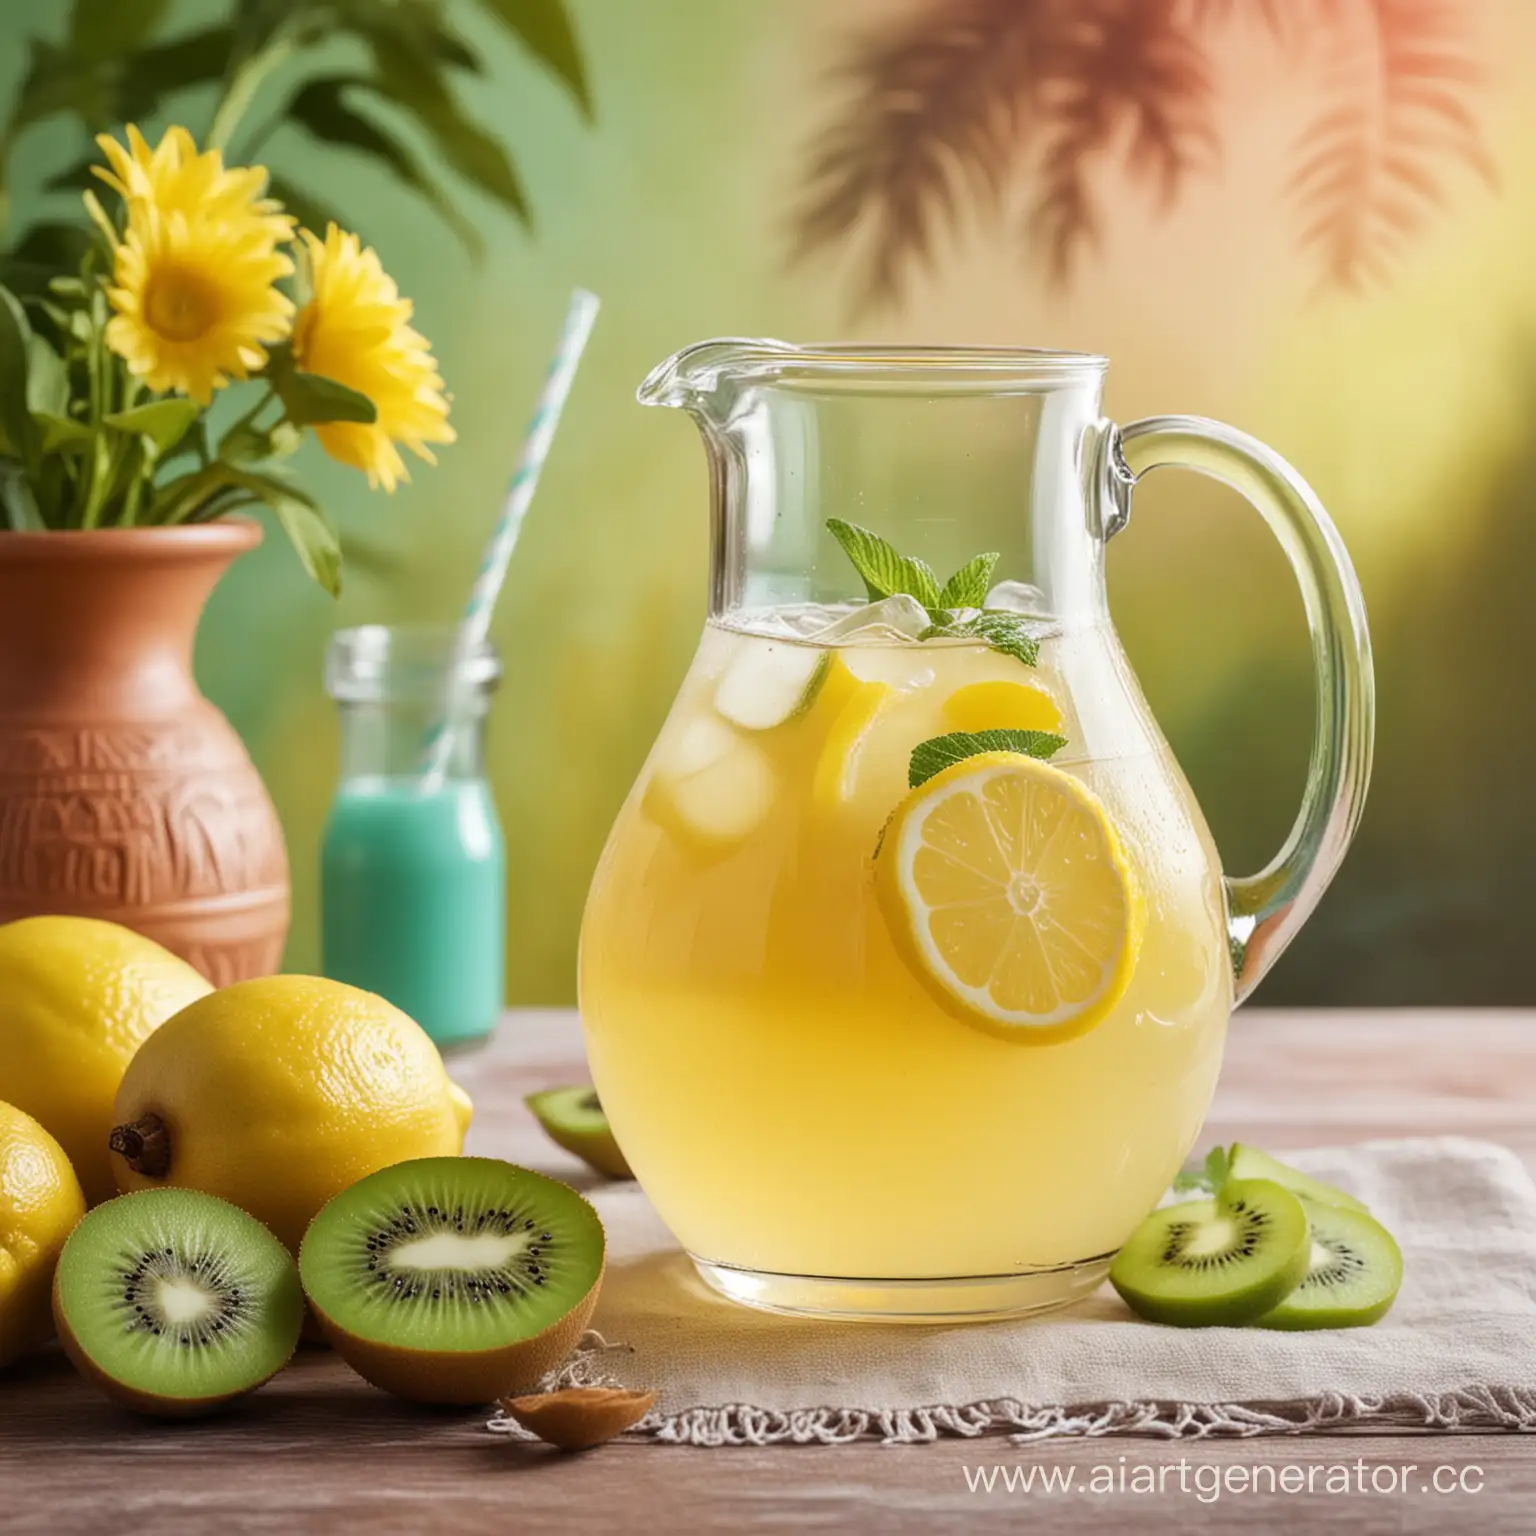 Refreshing-Lemonade-Jug-and-Glass-with-Kiwi-and-Mint-Accents